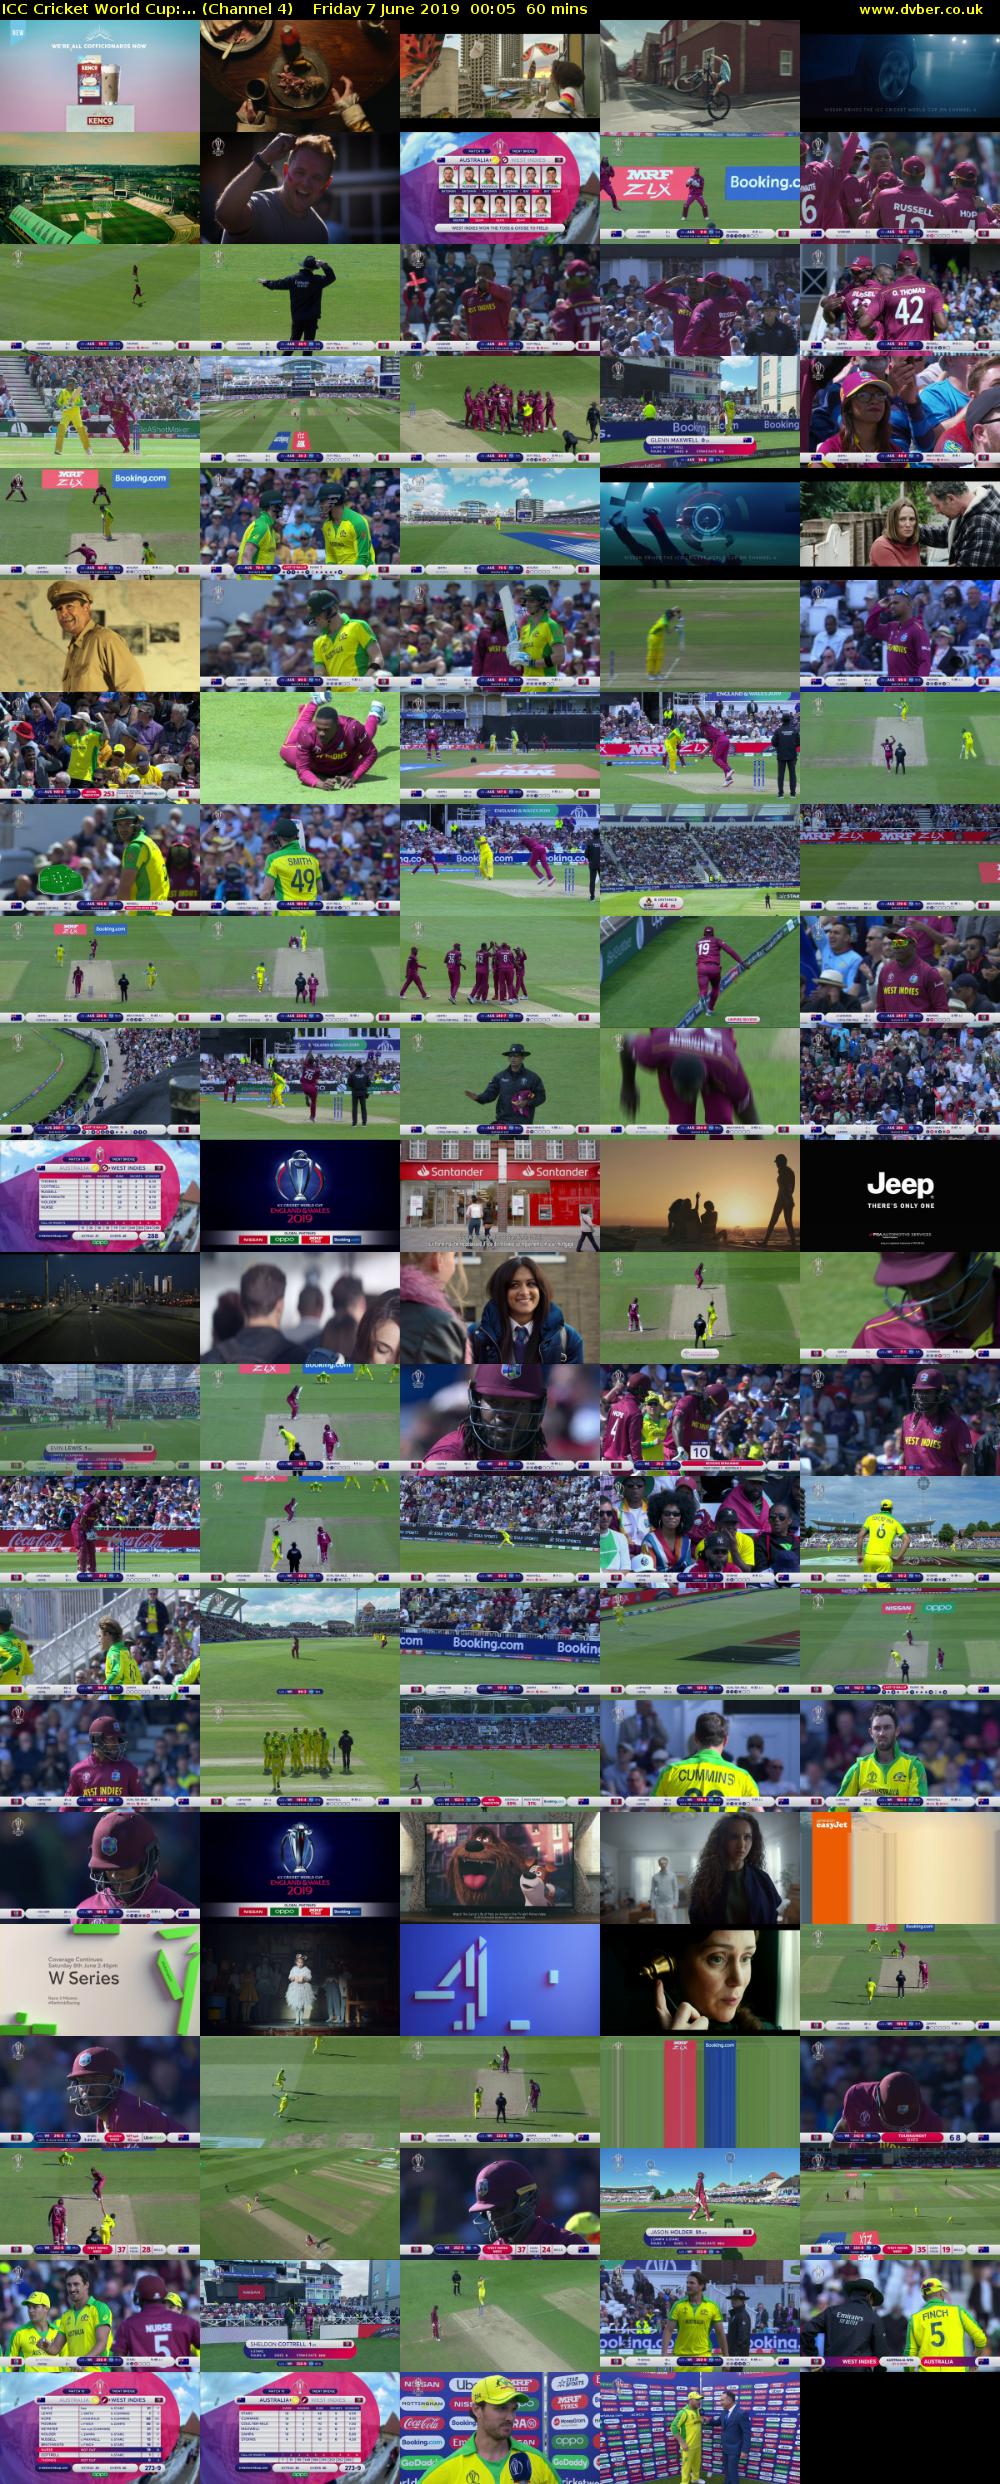 ICC Cricket World Cup:... (Channel 4) Friday 7 June 2019 00:05 - 01:05